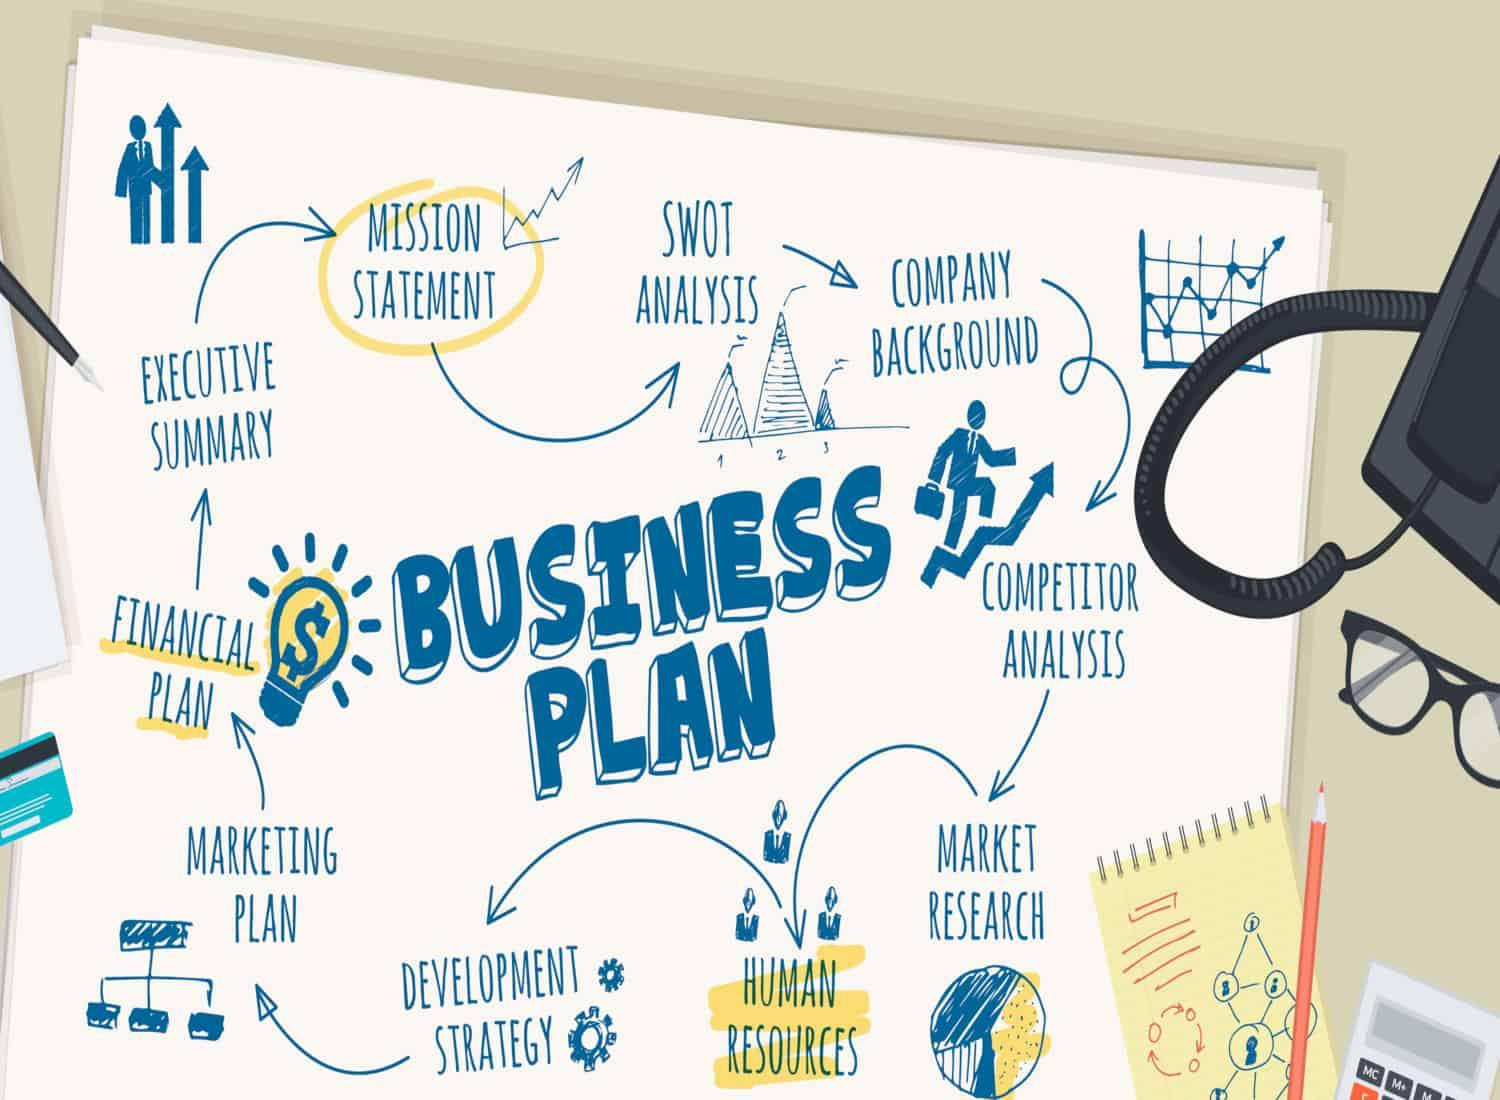 How To Make A 5 Year Business Plan - [ 7 STEPS ] SmallBusinessify.com